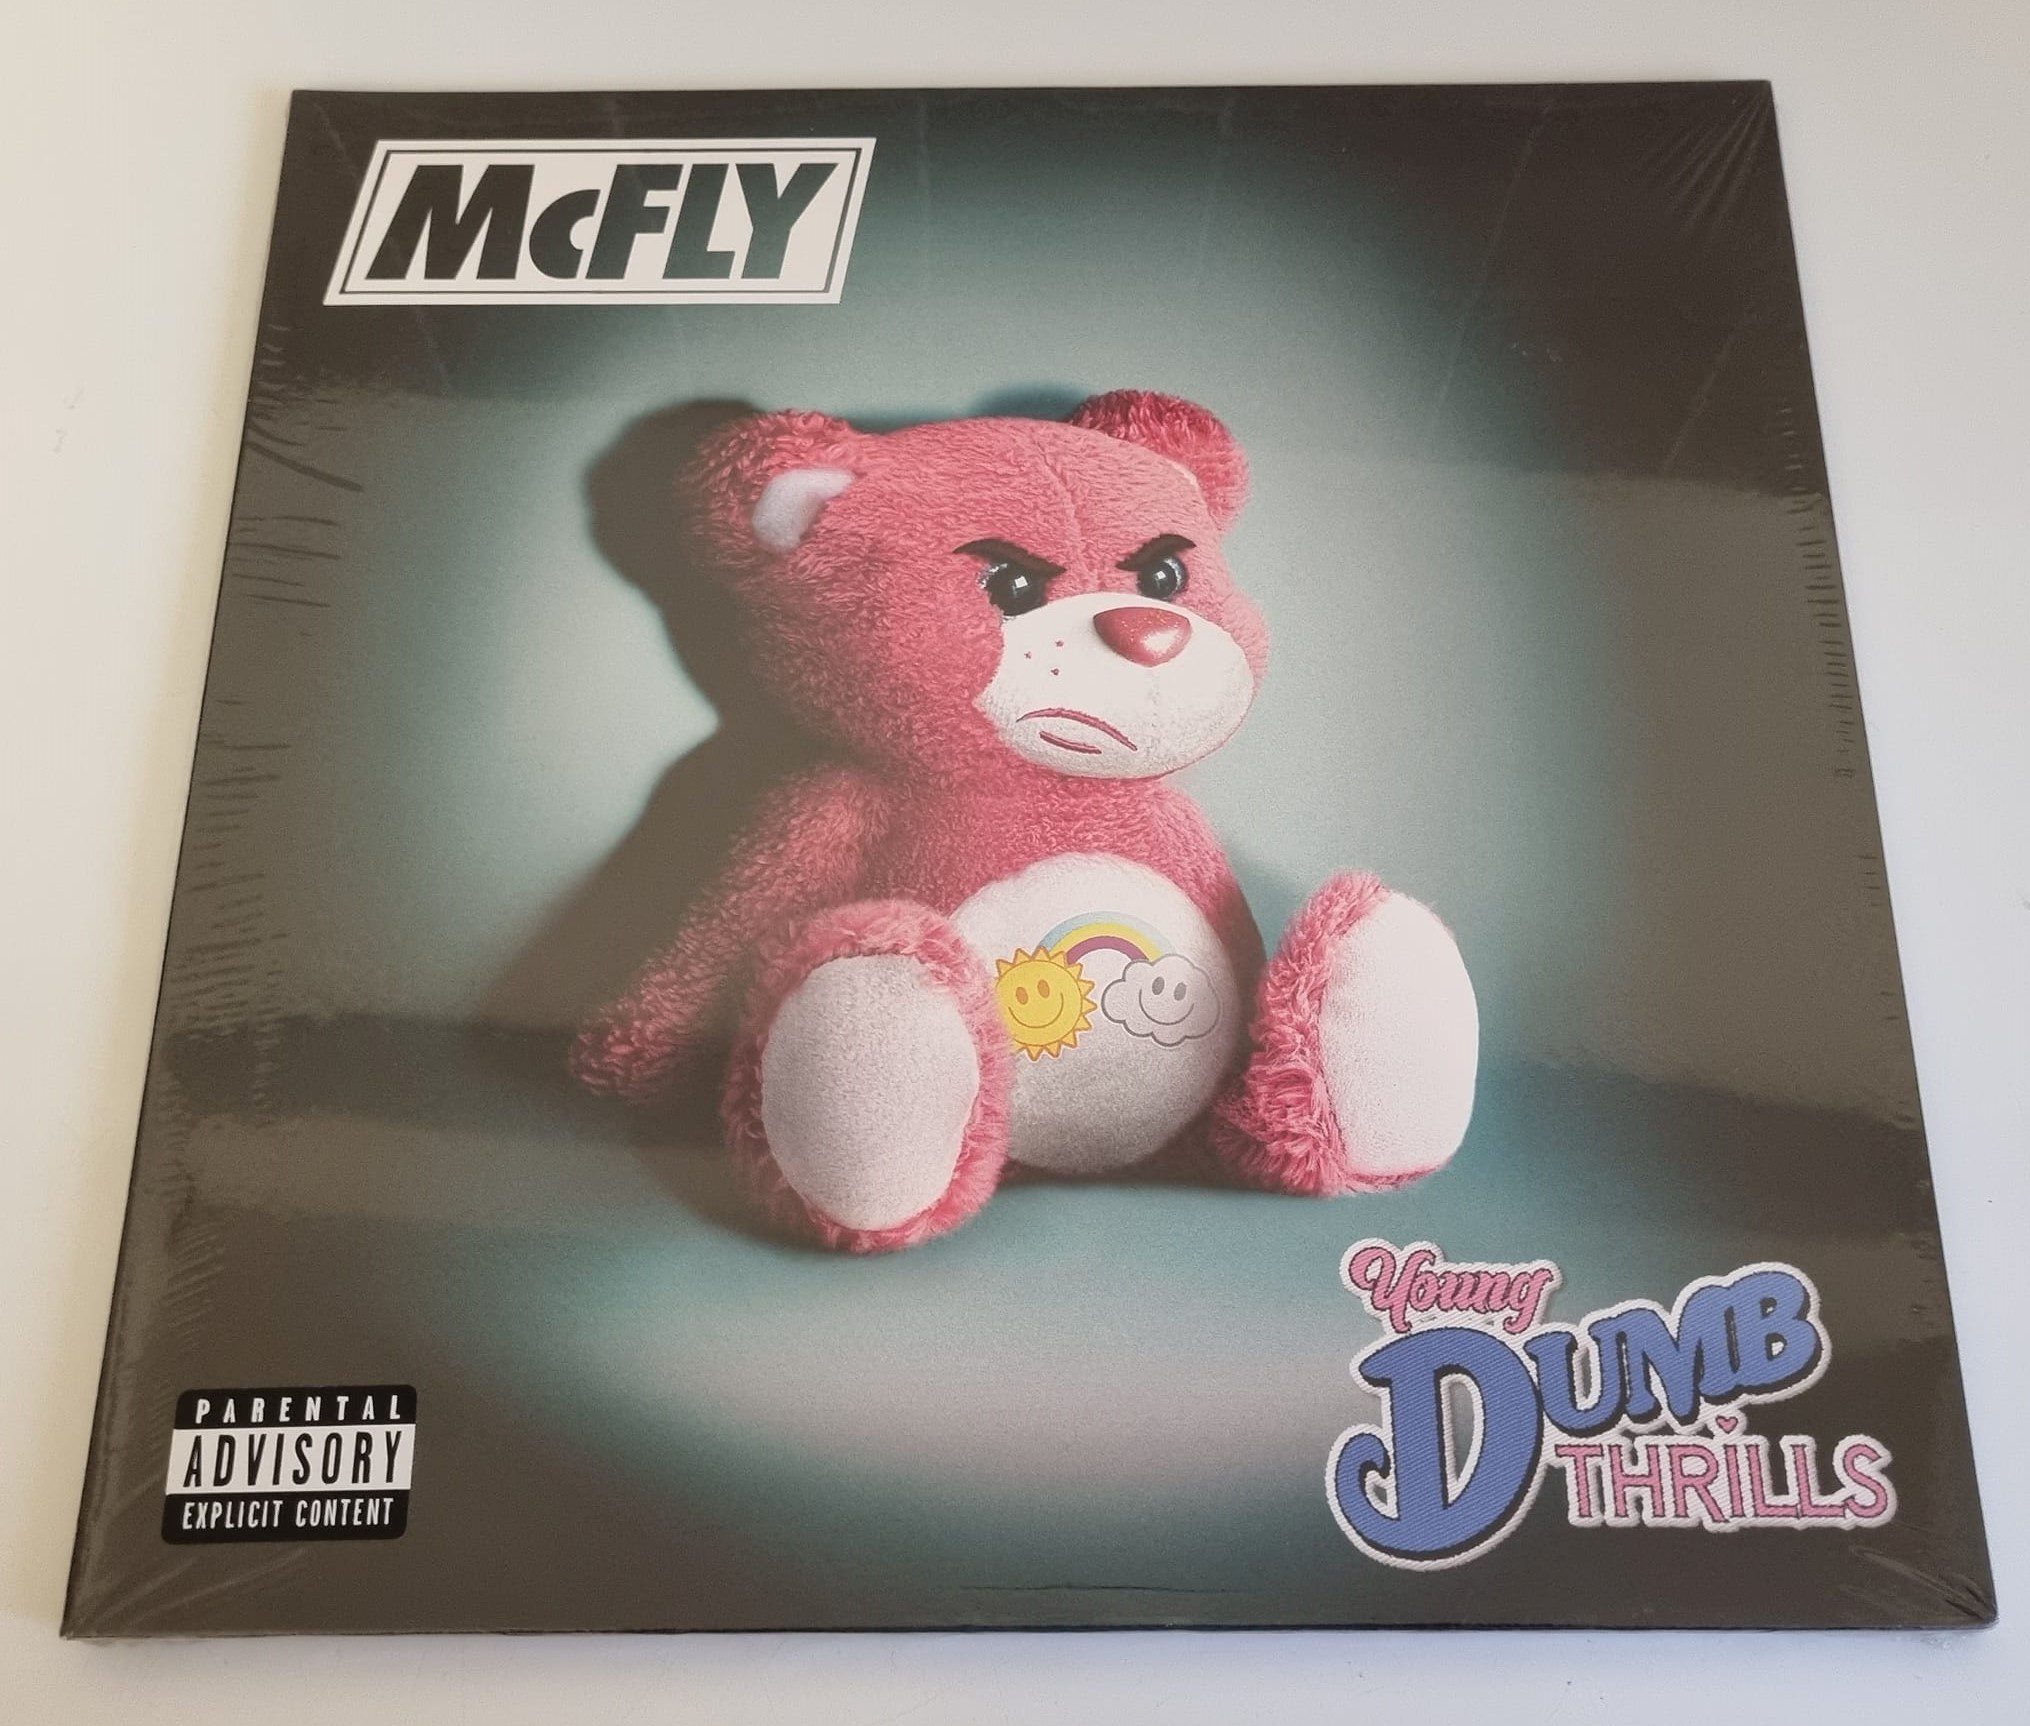 Buy this rare McFly record by clicking here